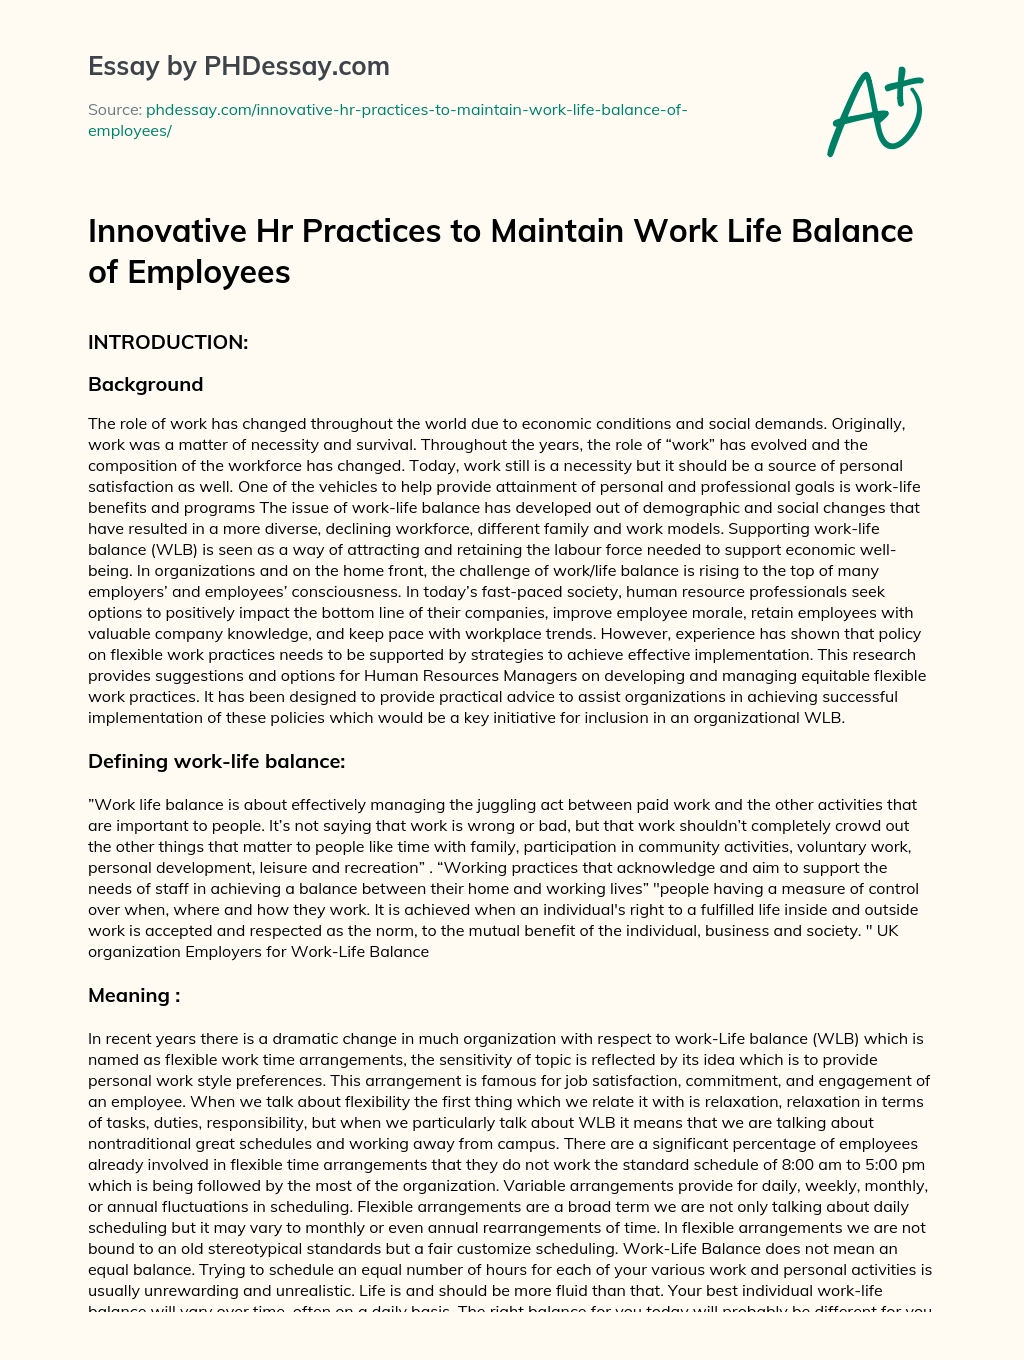 Innovative Hr Practices to Maintain Work Life Balance of Employees essay